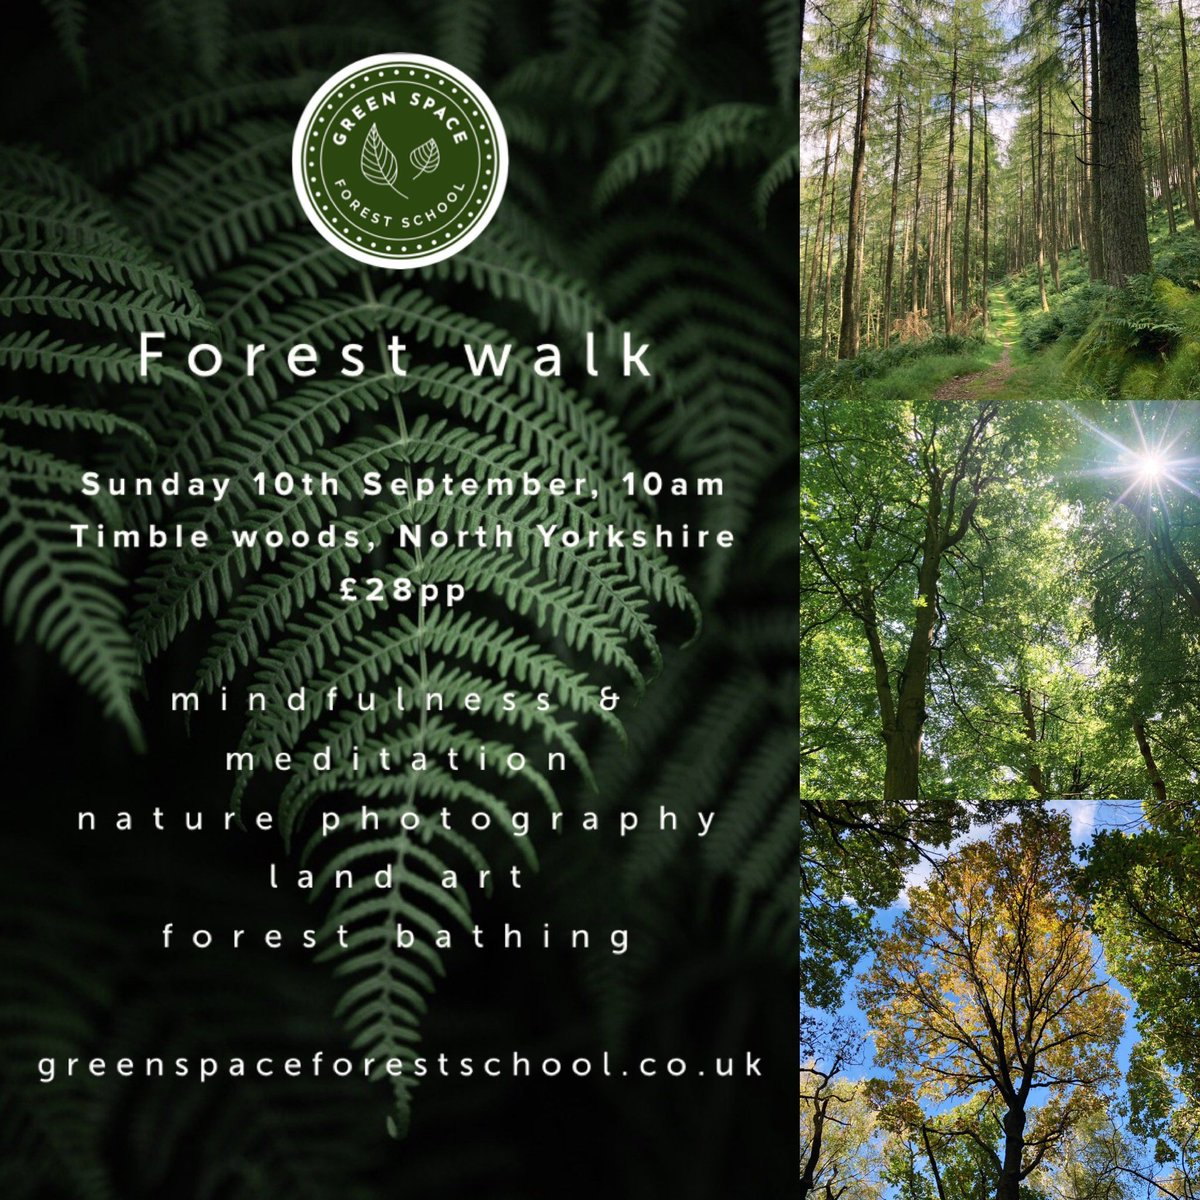 Next event coming up in Sept: Recharge and connect with nature on a mindful walk through the forest. Open up your senses and explore forest bathing techniques, nature photography, guided meditations and create land art. 🌳🙏
#Wellbeing #natureconnection 
greenspaceforestschool.co.uk